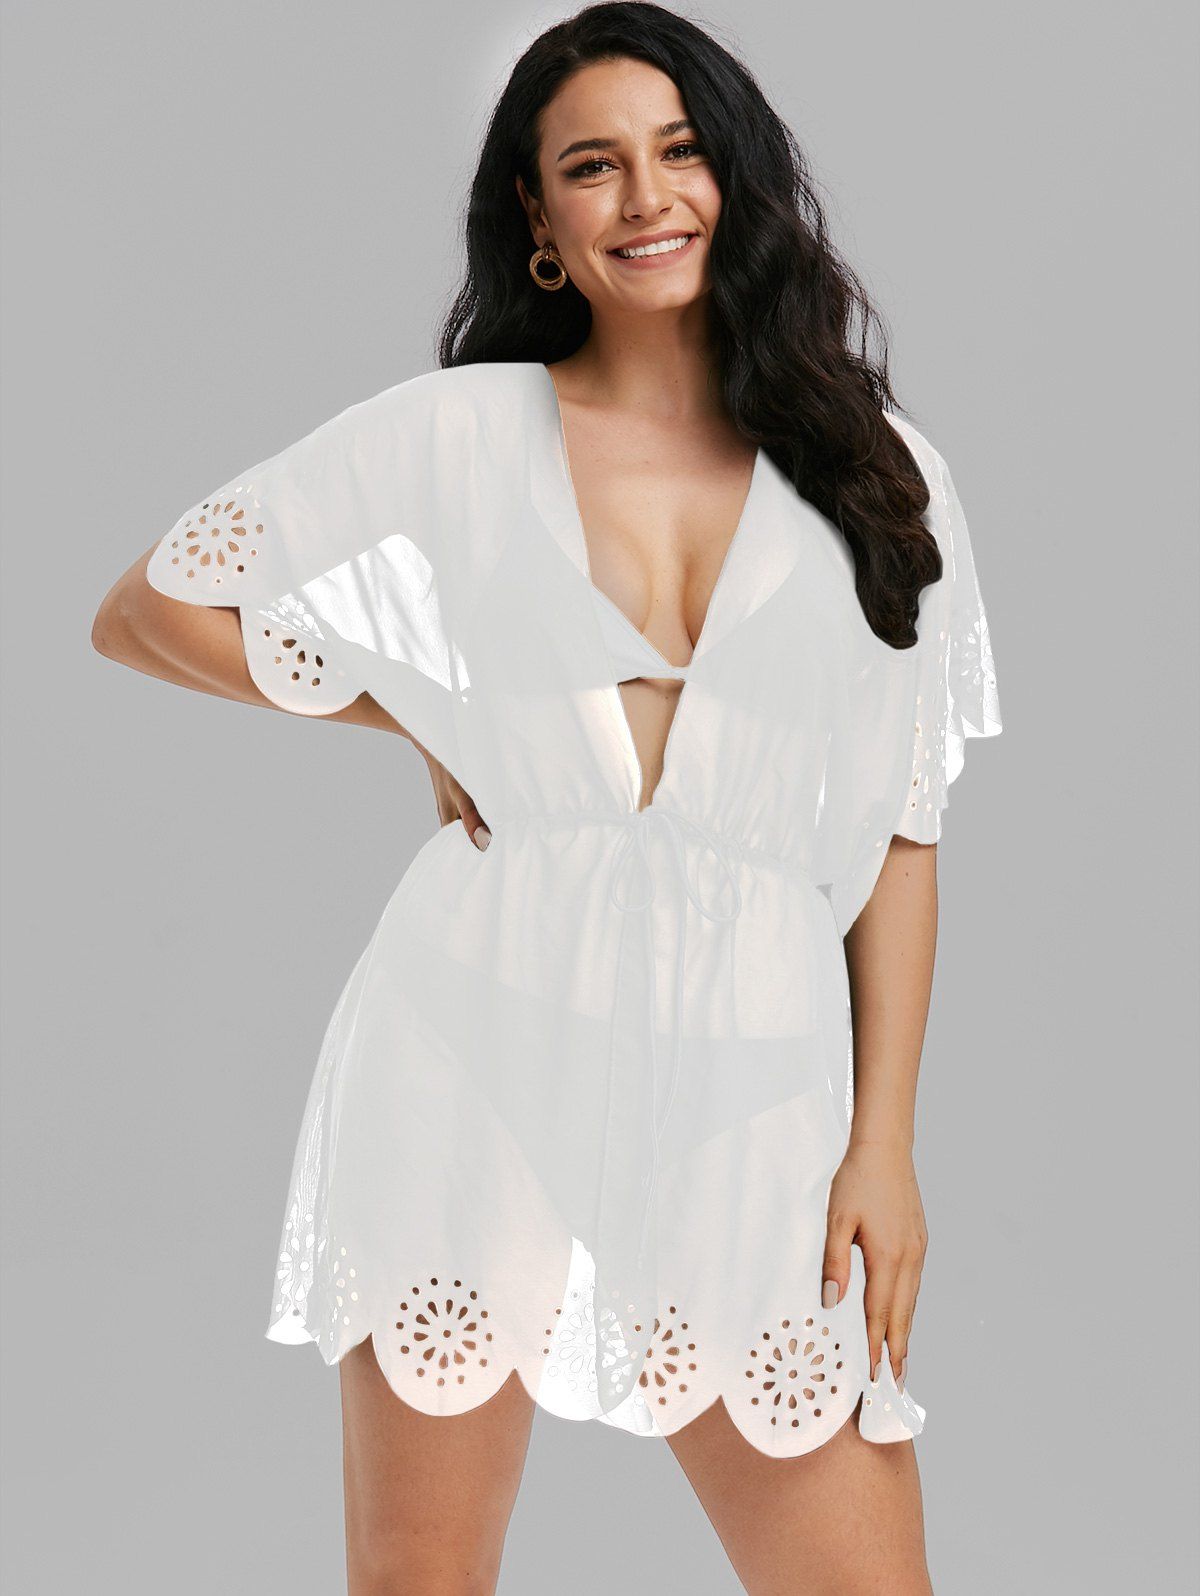 Sheer Cover Up Laser Cut Out Scalloped Plunging Neck Bat Sleeve Tunic Beach Top - WHITE 3XL